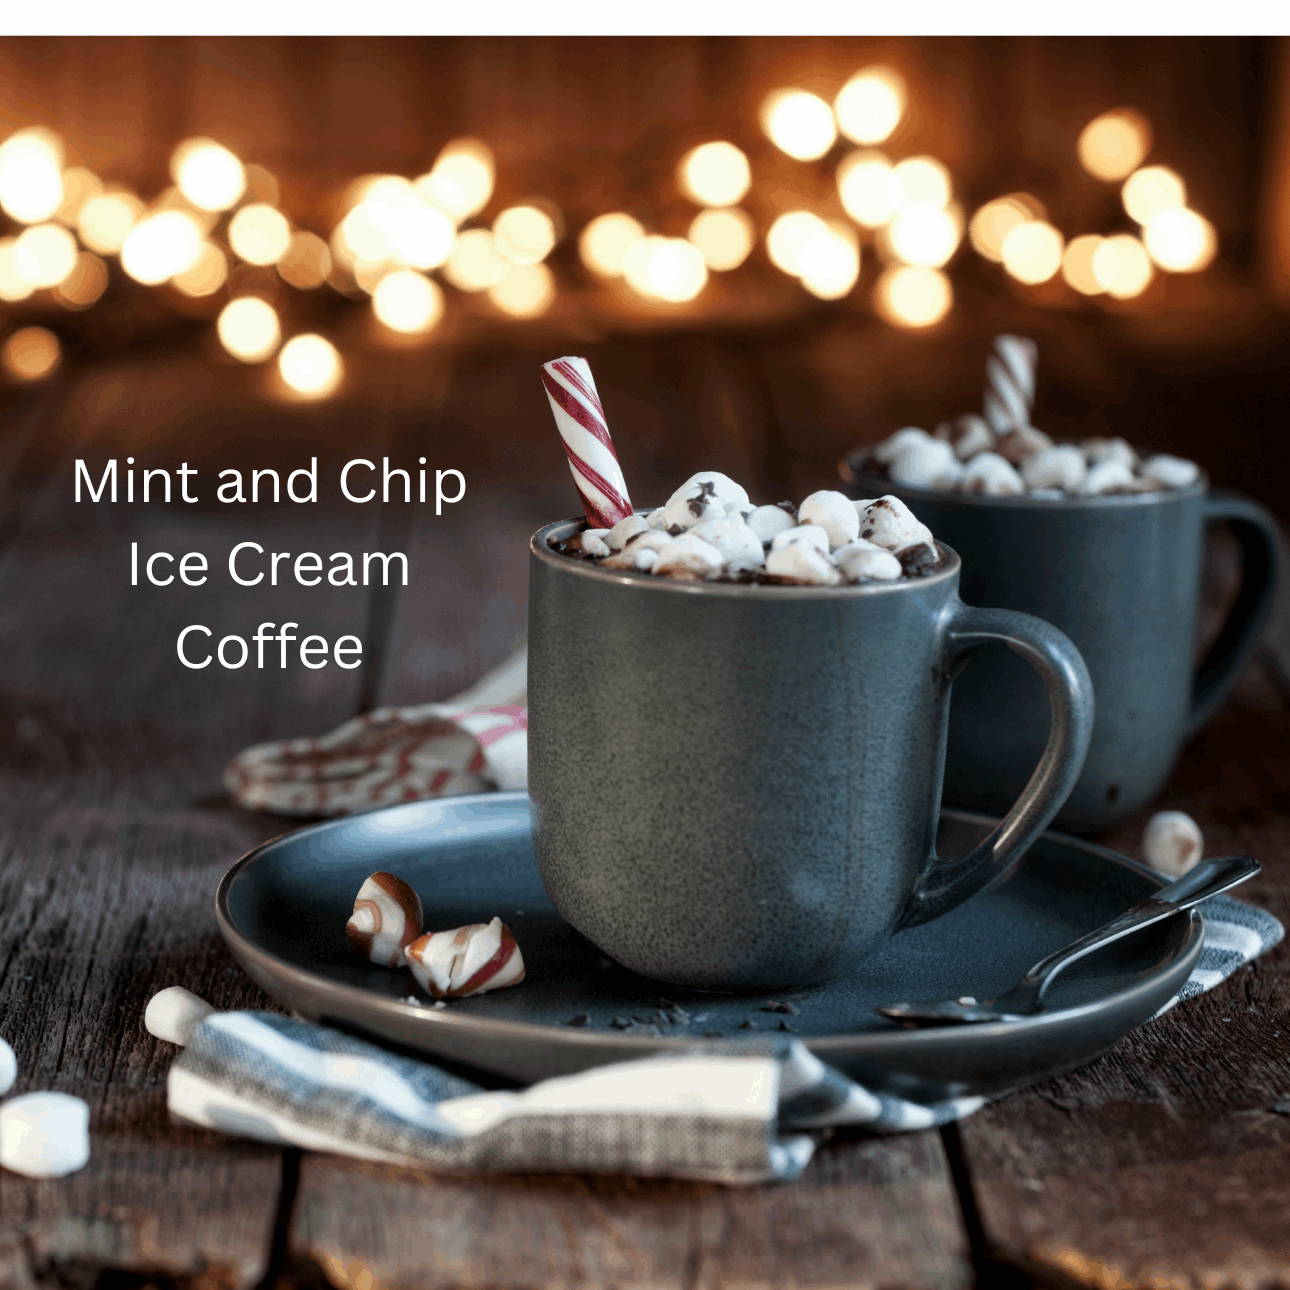 Mint and Chip Ice Cream Coffee